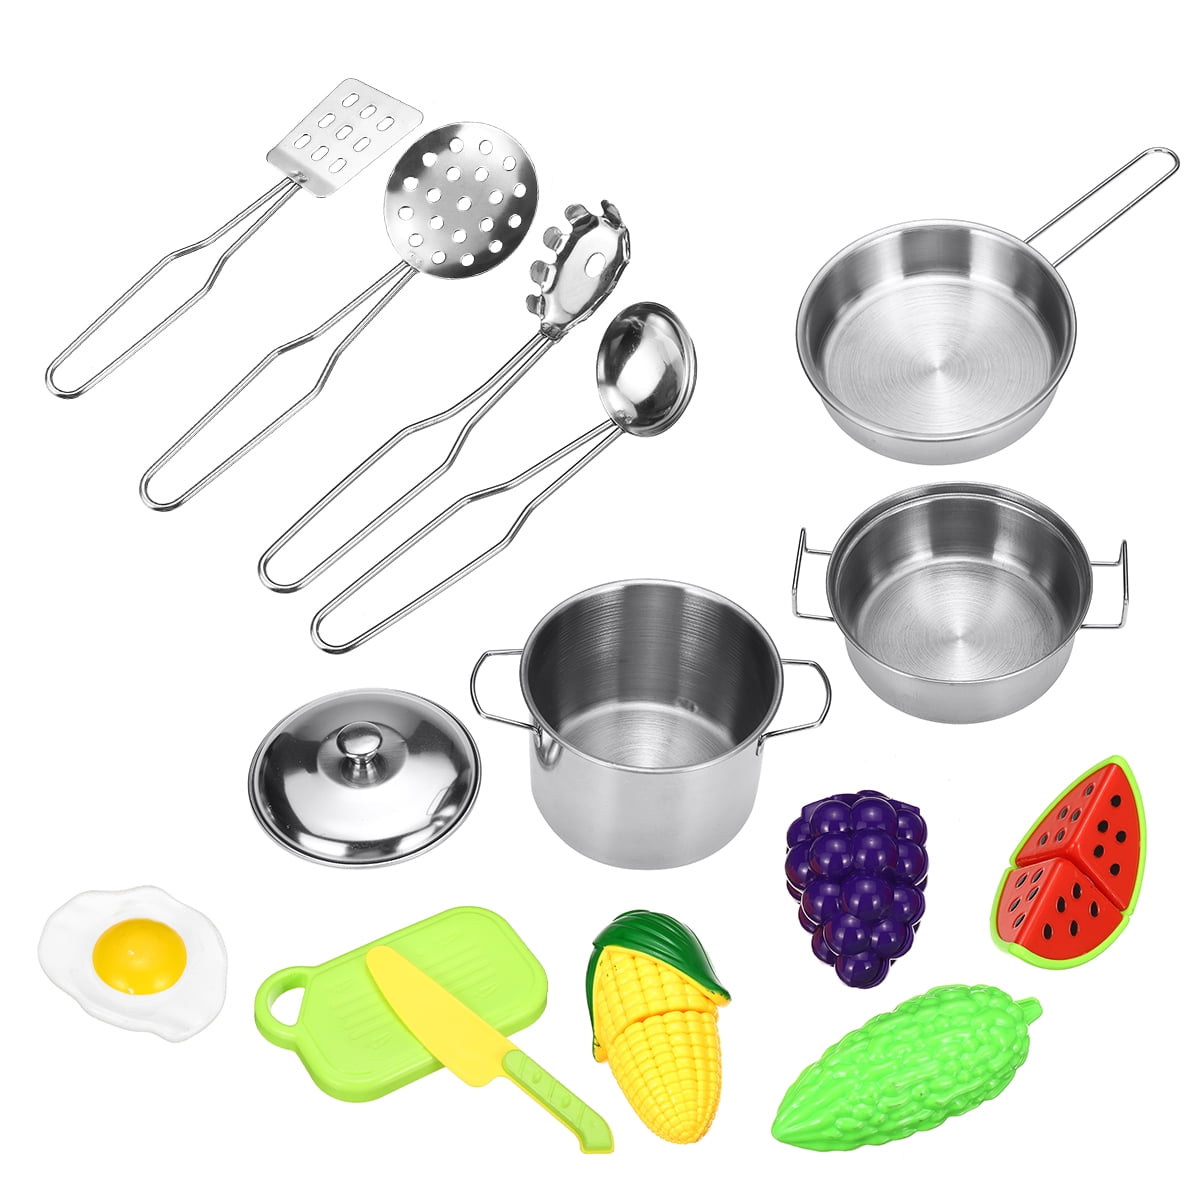 15Pcs Stainless Steel Stainless Steel Kitchen Cookware ...